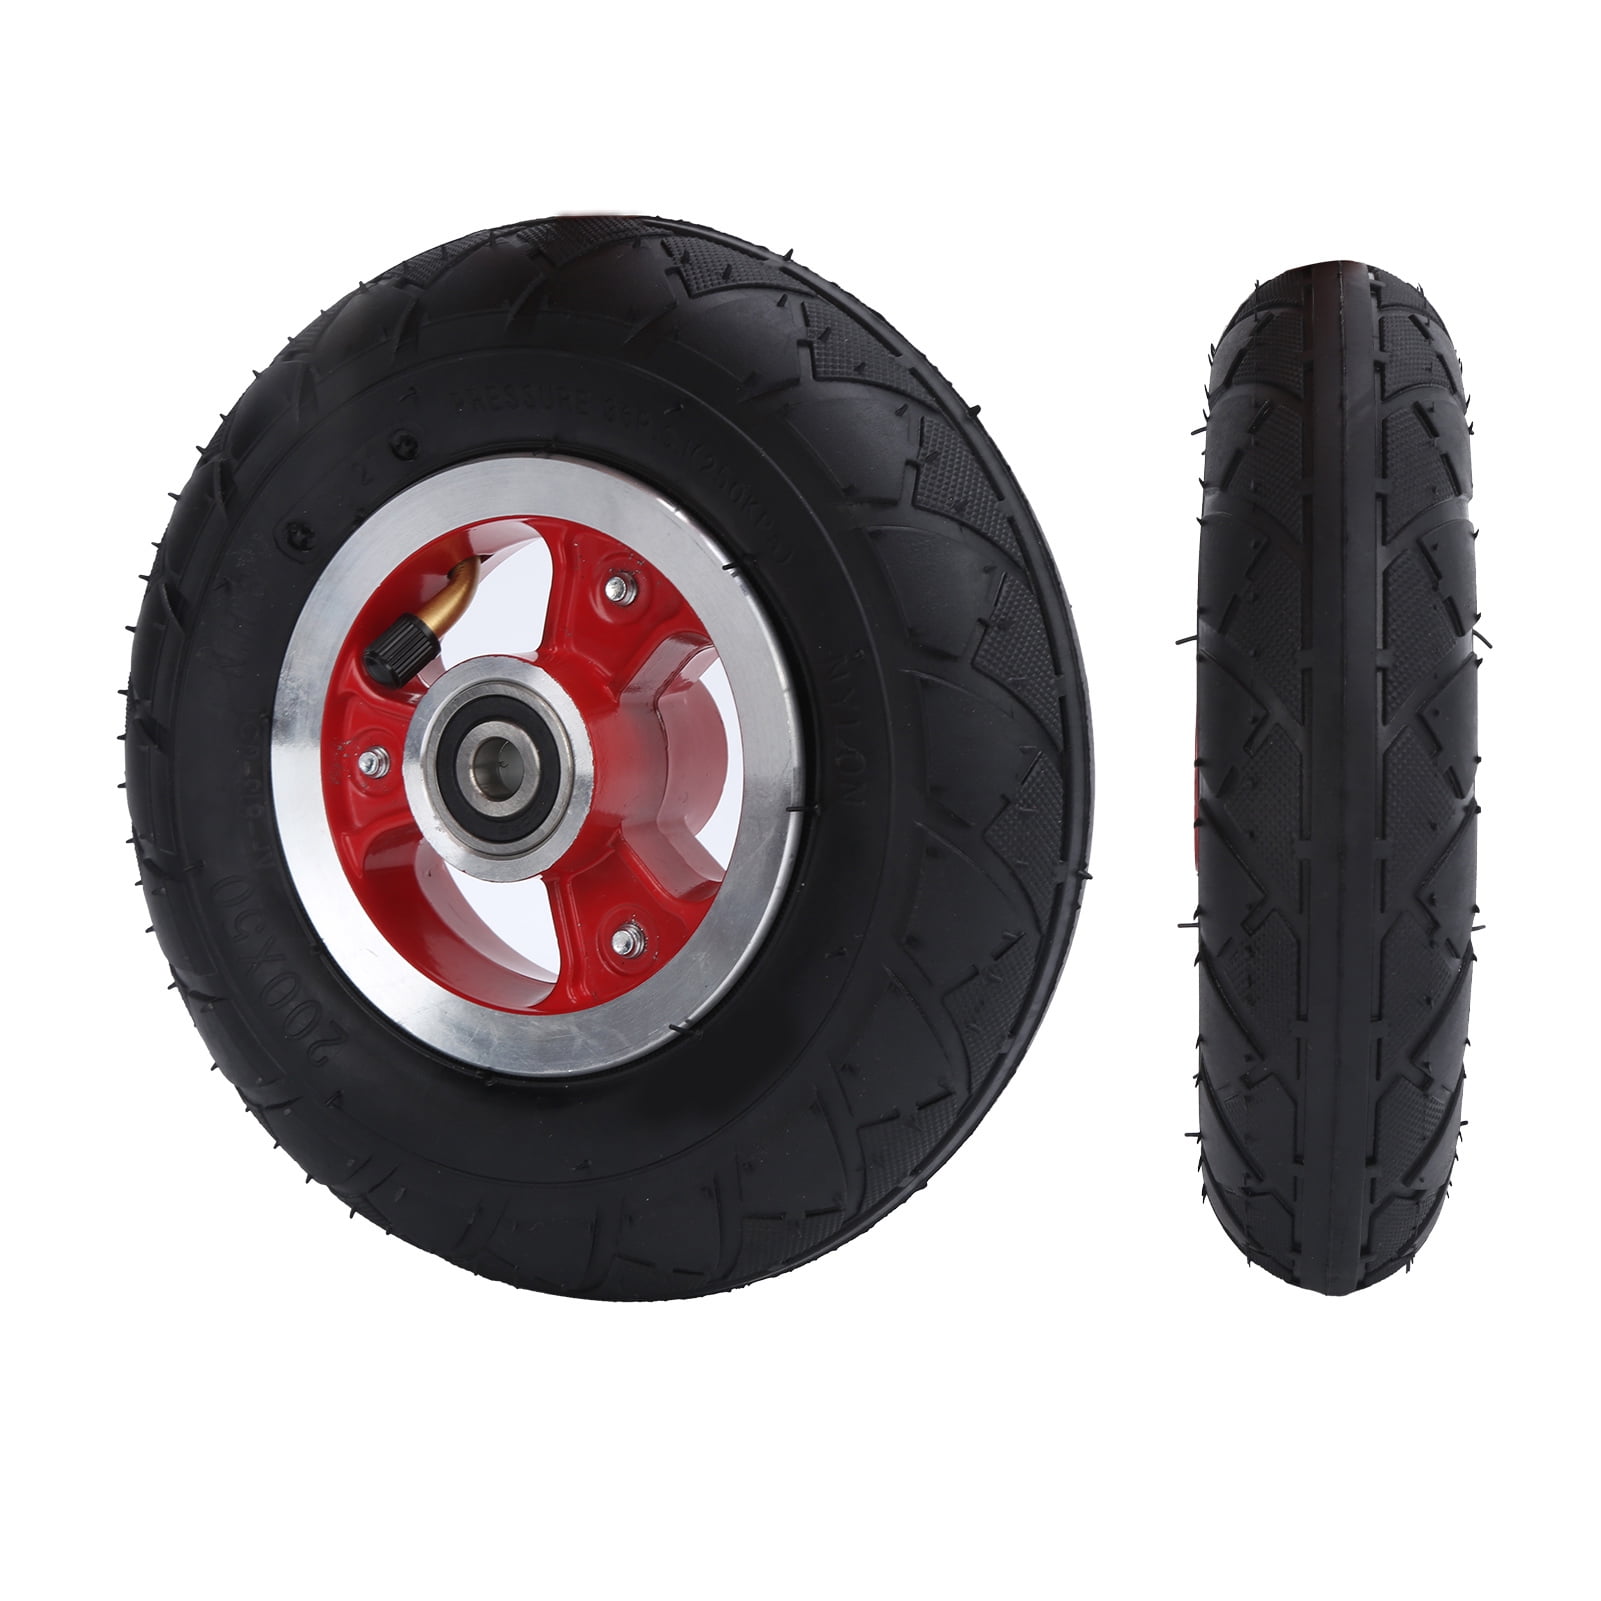 Black Tire Accessories 200*50 Rubber Tire Wheel Scooter Useful Durable 